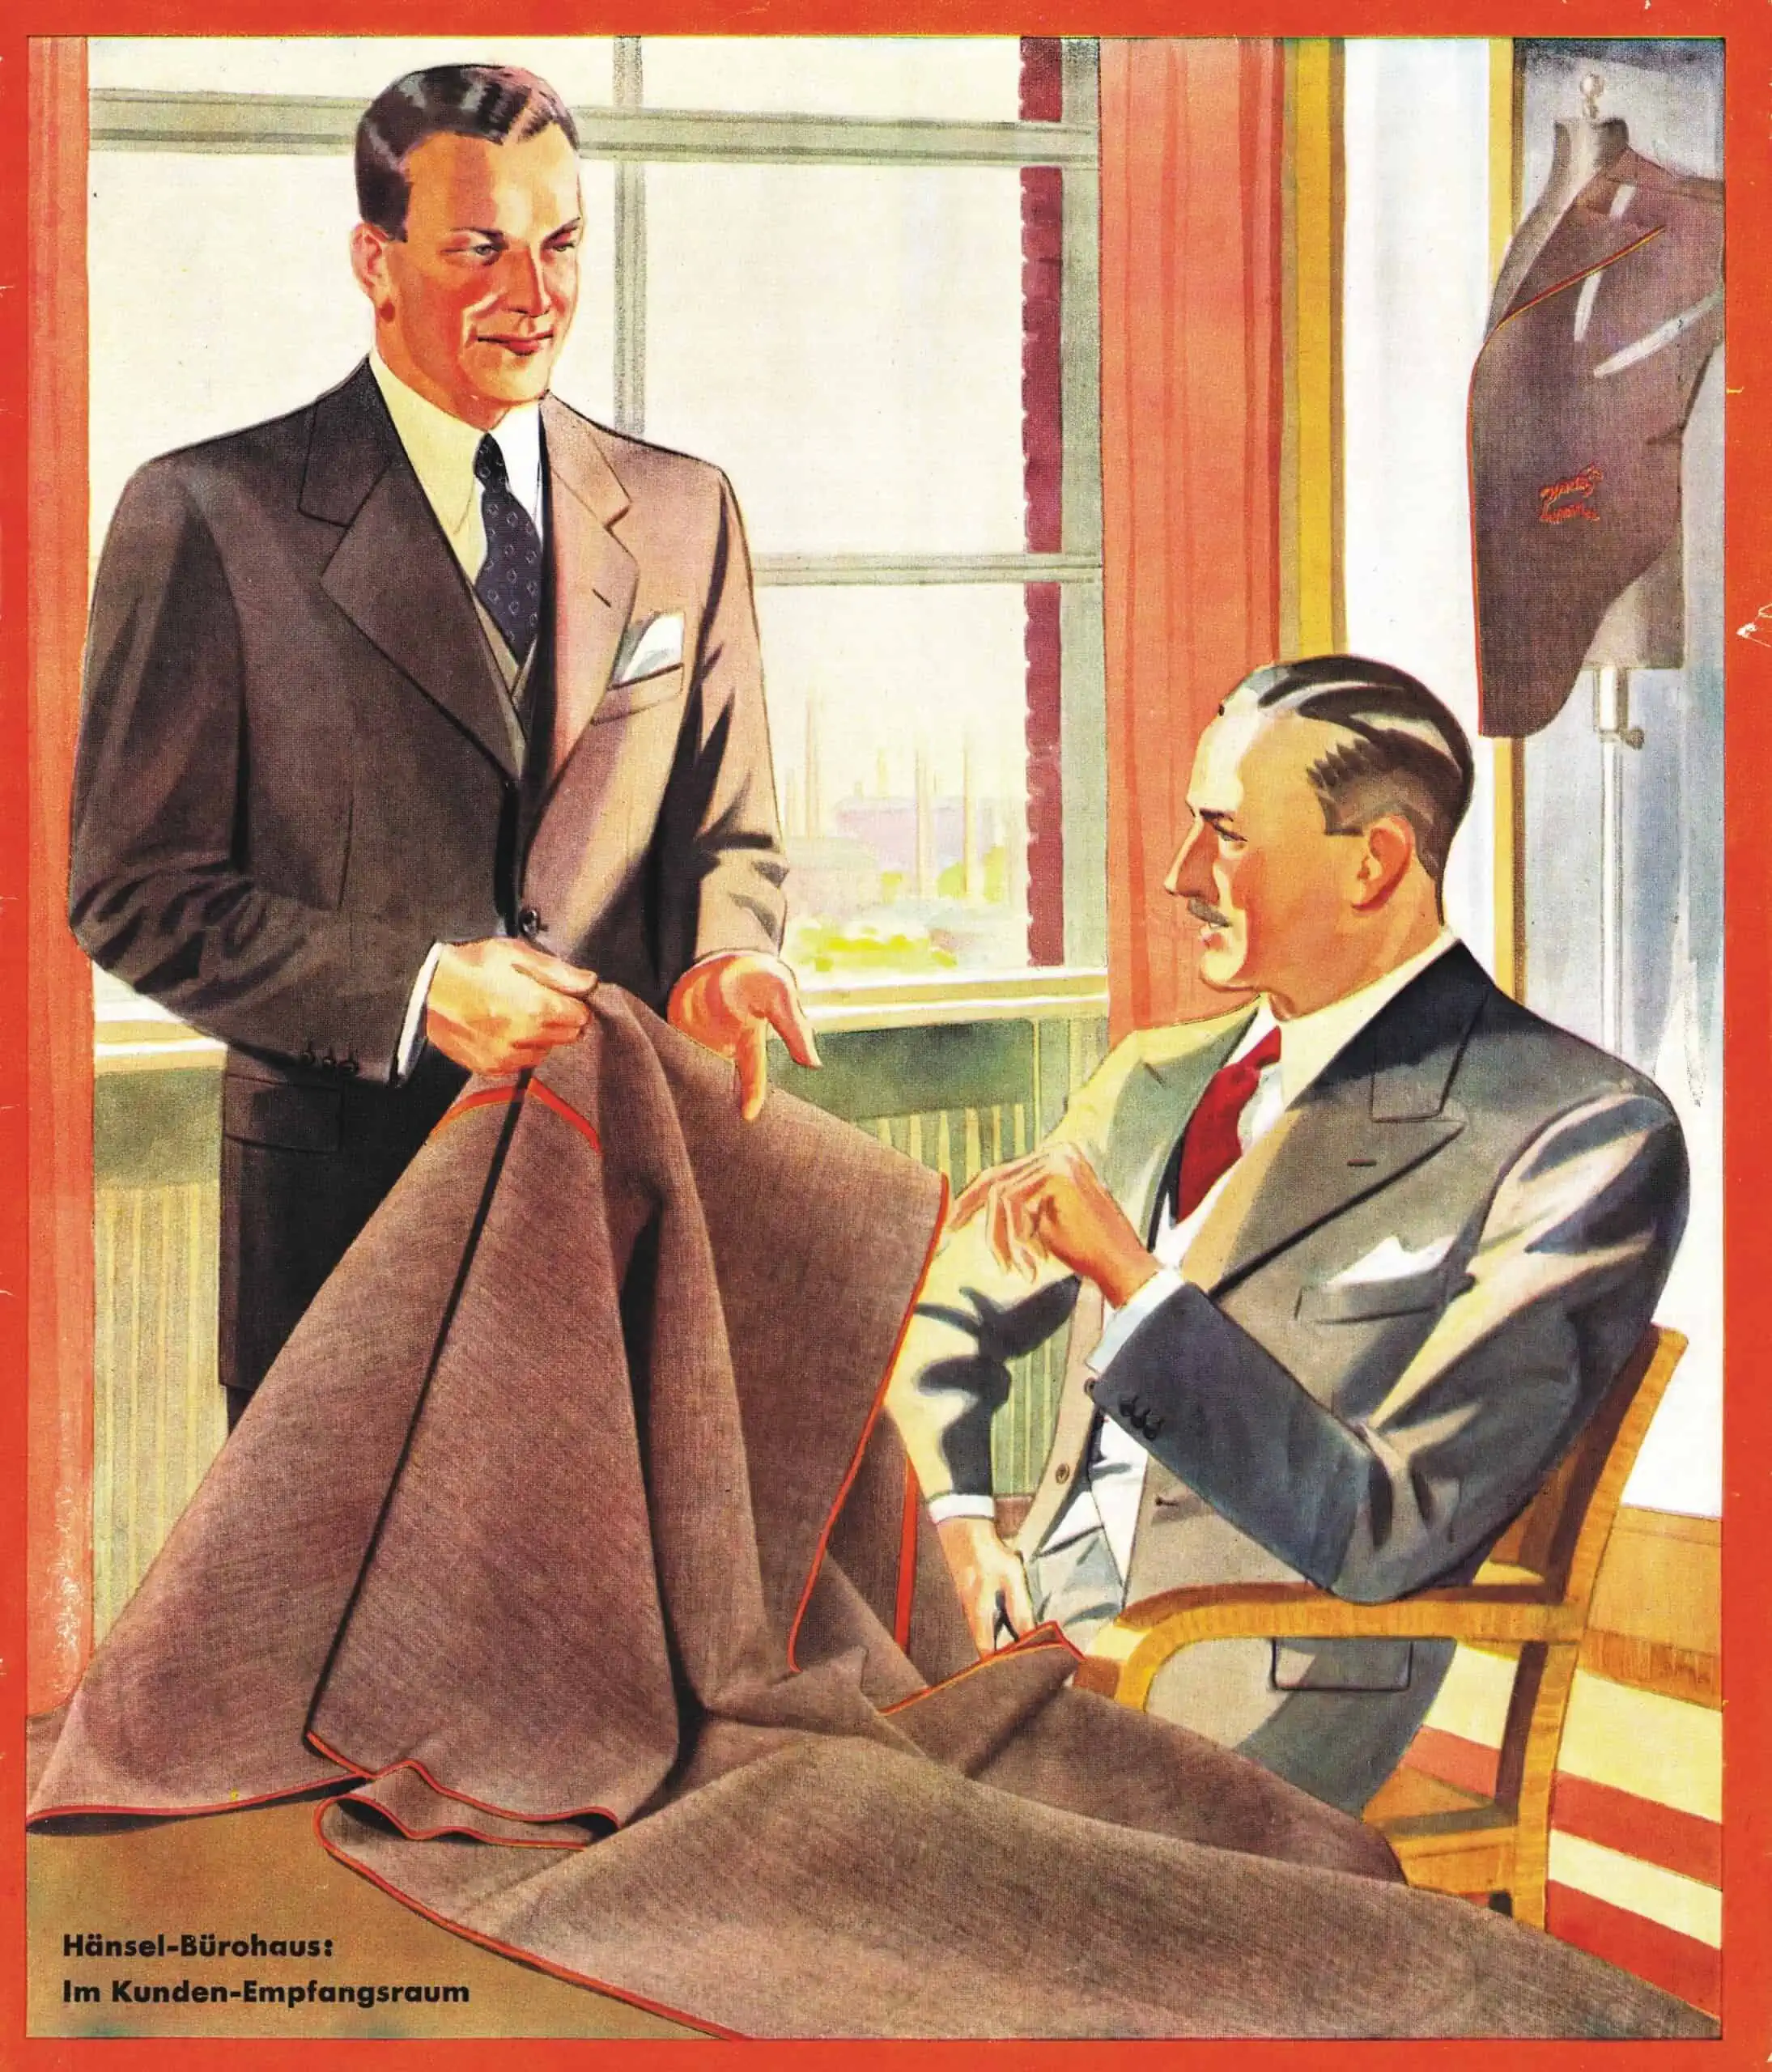 Illustration of two men examining a piece of cloth